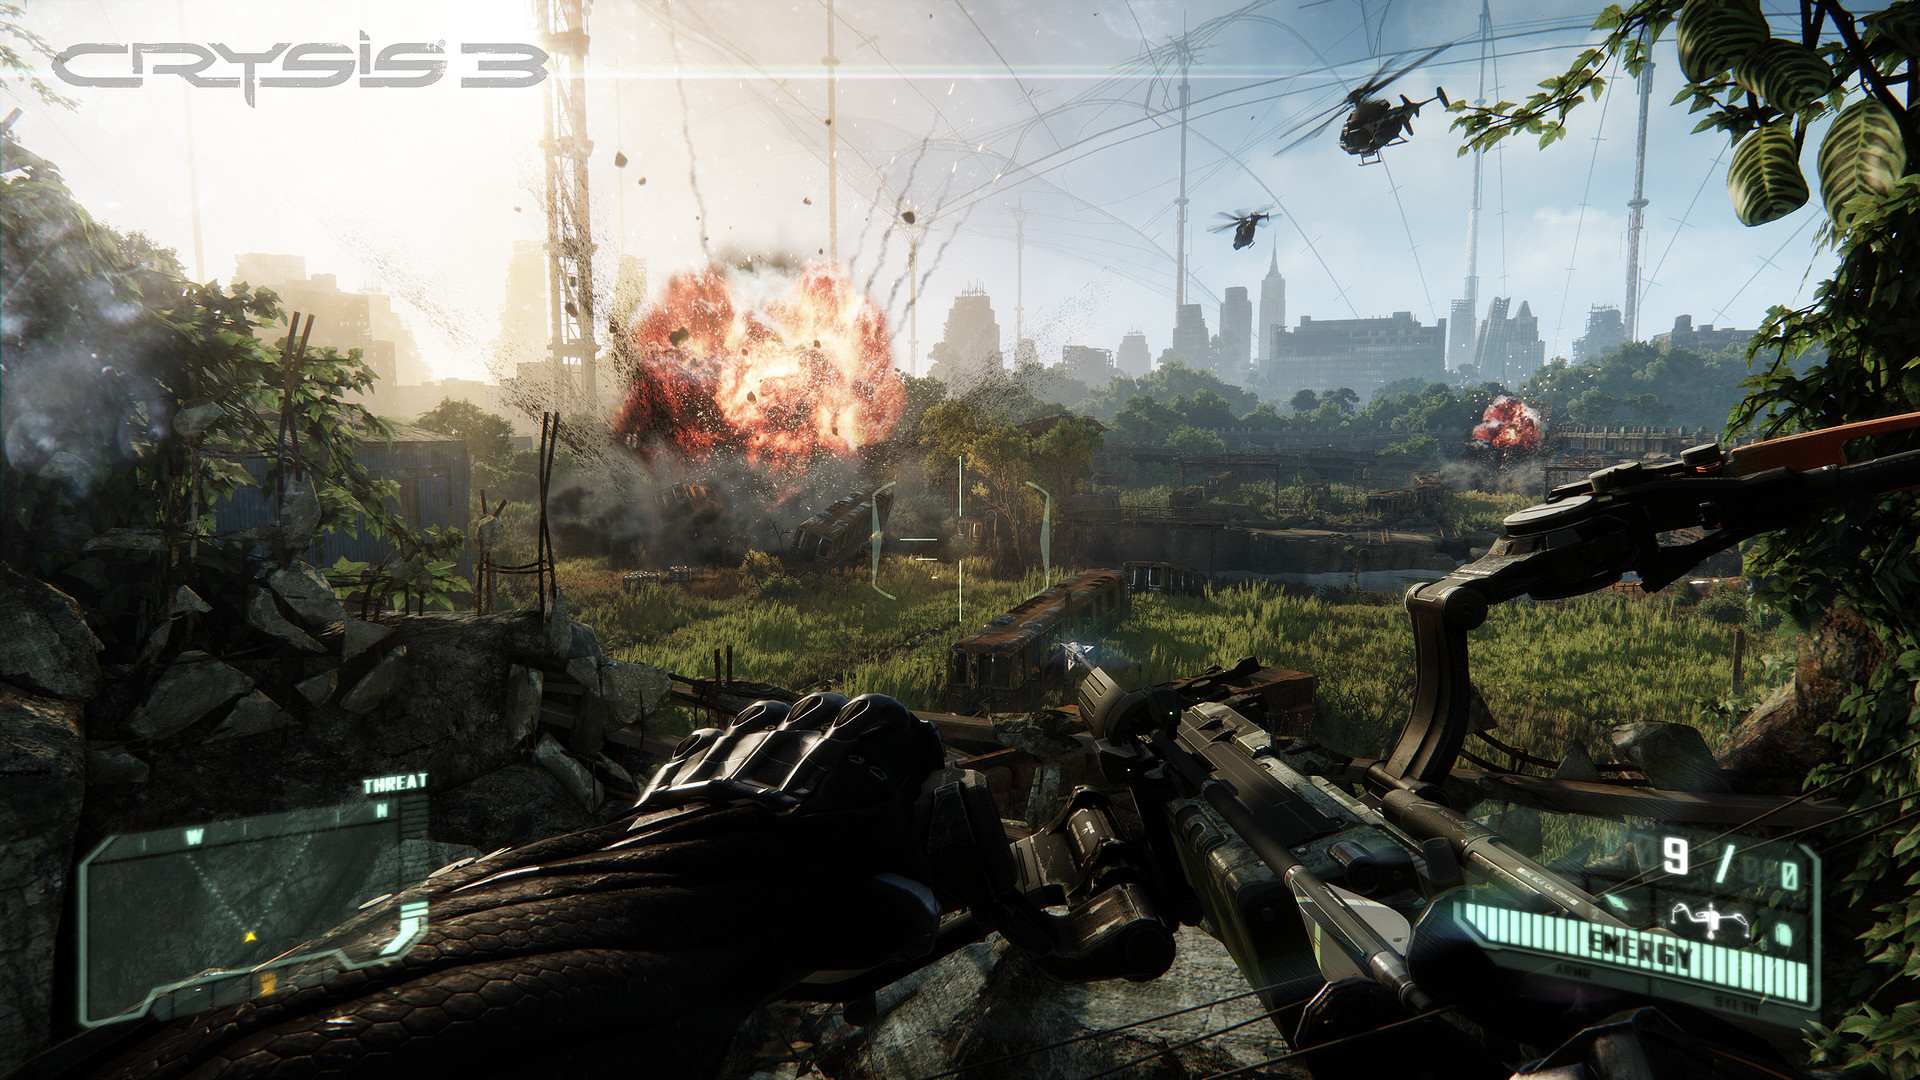 1920x1080 Crysis 3 Pictures